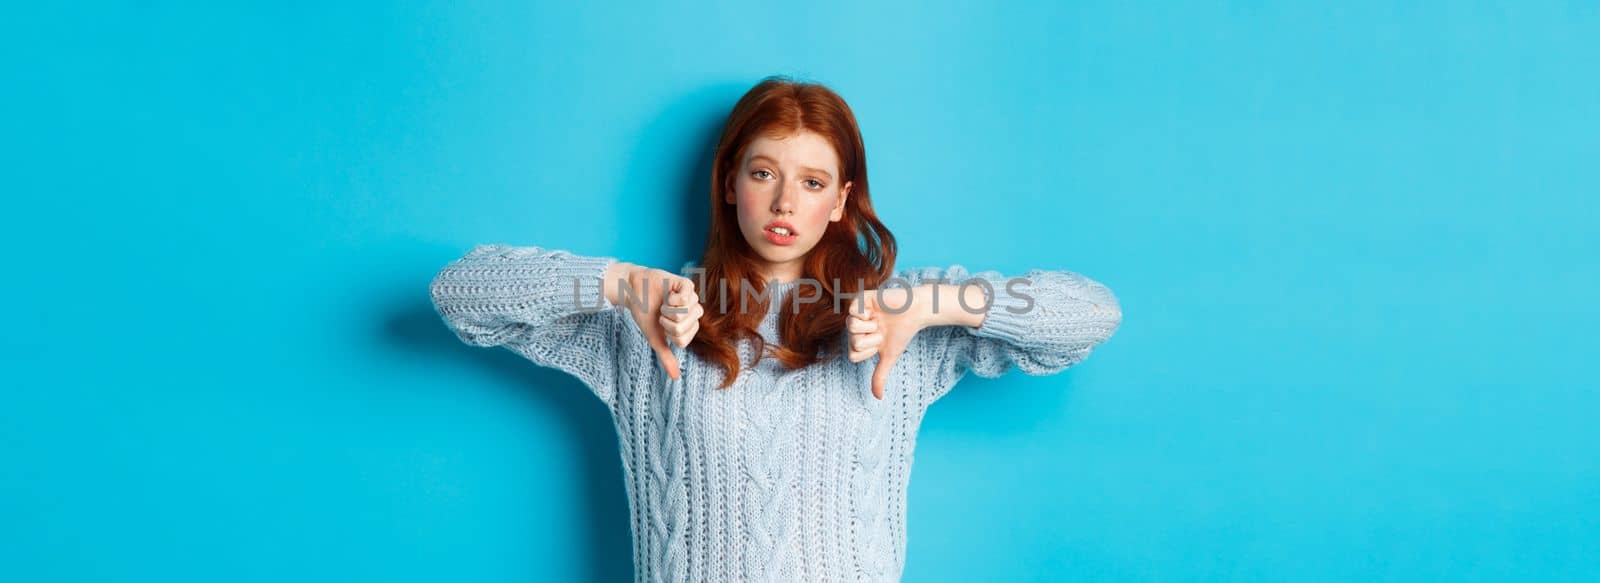 Bored and skeptical redhead girl showing thumbs down, looking unamused and uninterested, standing over blue background by Benzoix